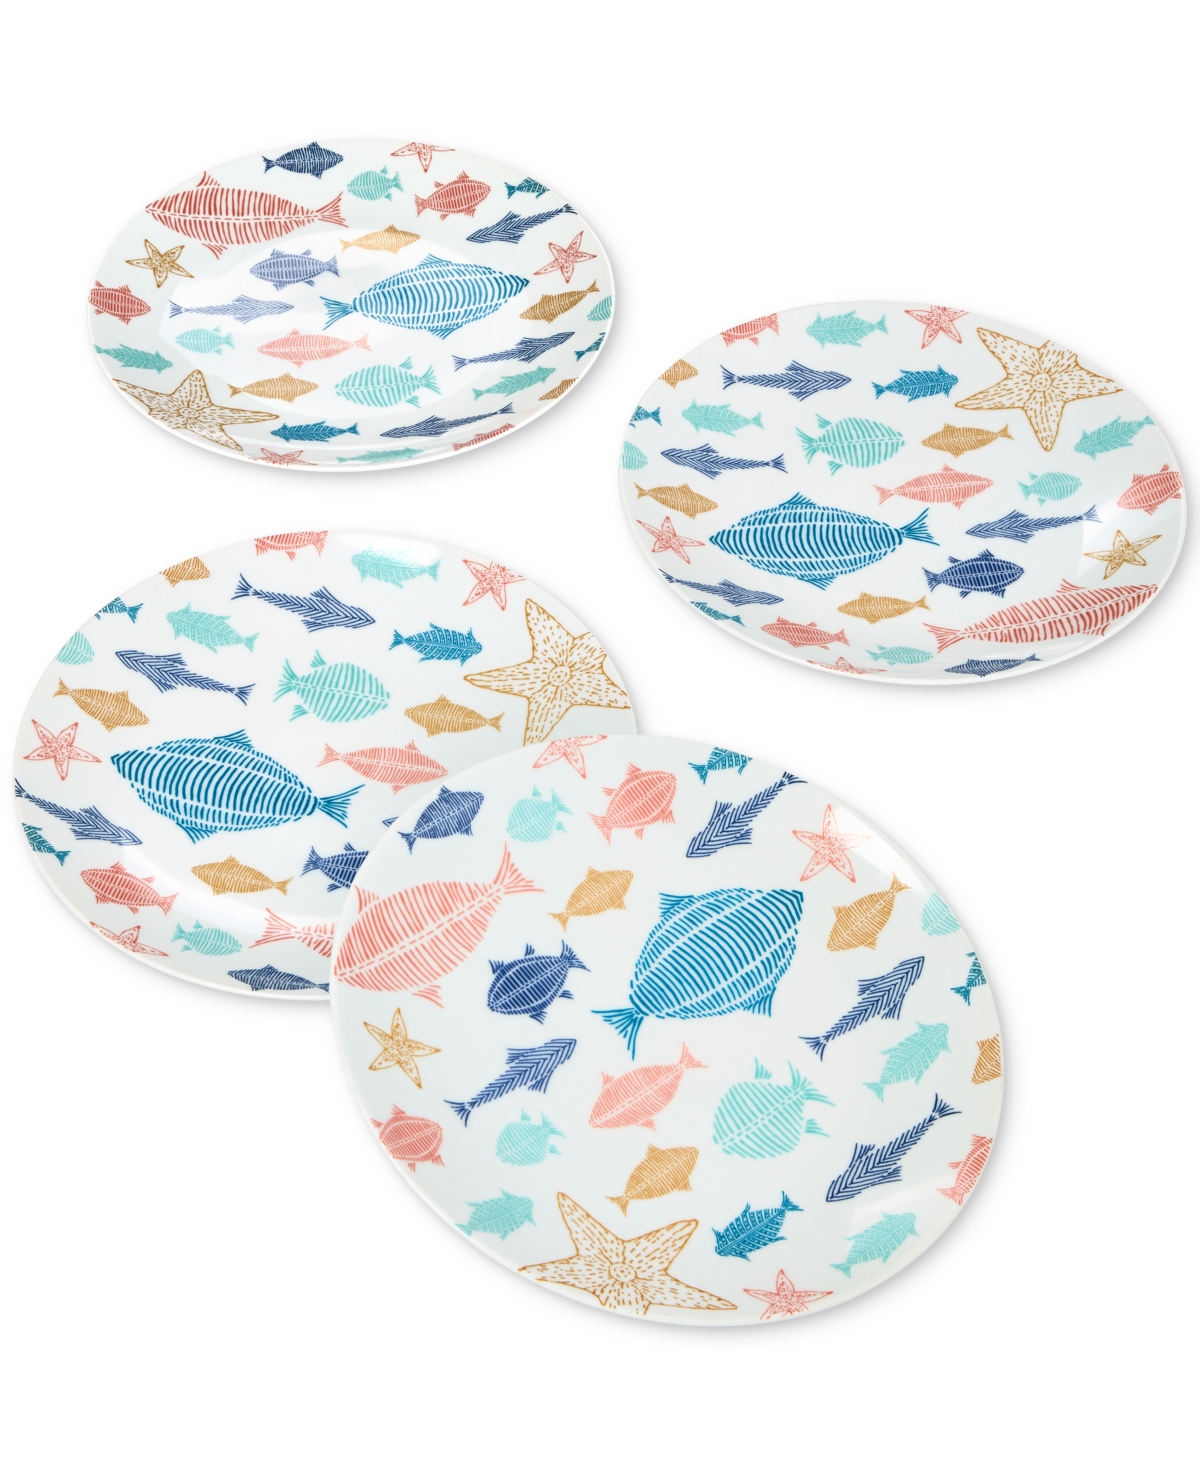 Fish Motif Salad Plates, Set of 4, Created for Macy's